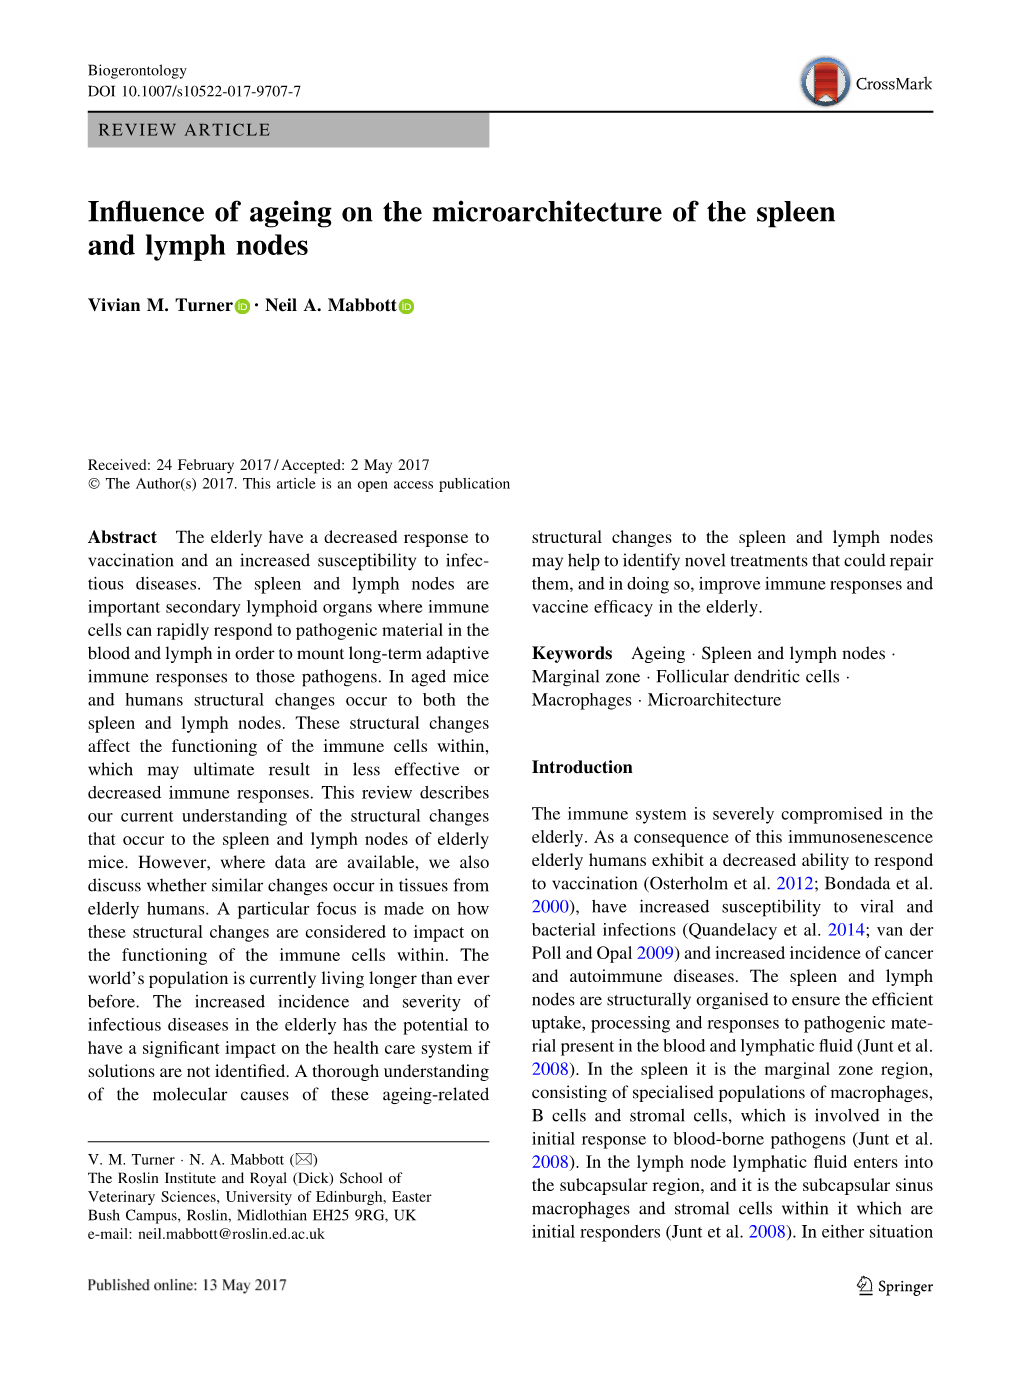 Influence of Ageing on the Microarchitecture of the Spleen And